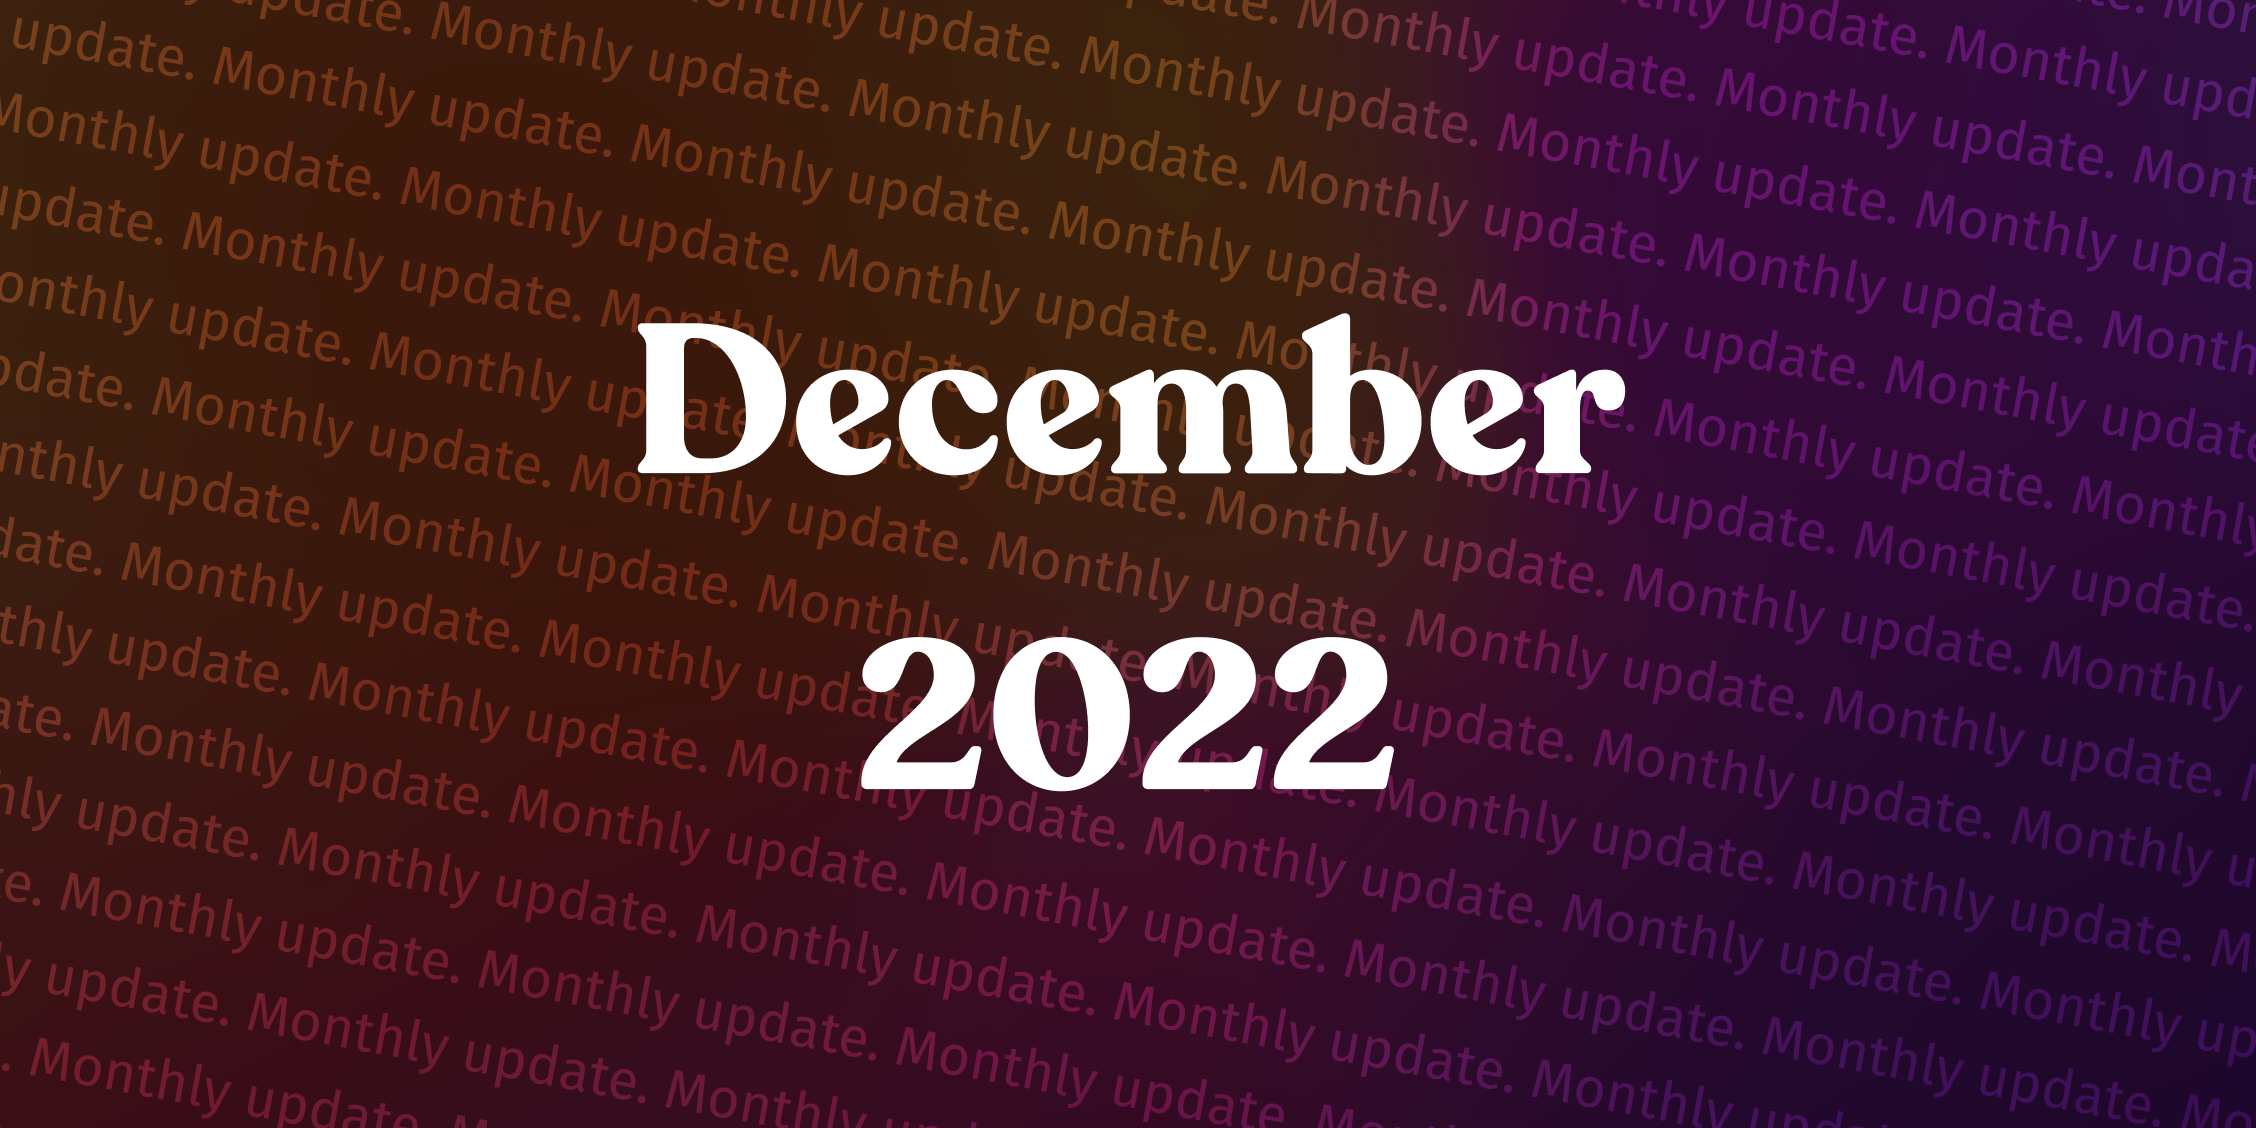 What’s new in Pausly, December 2022